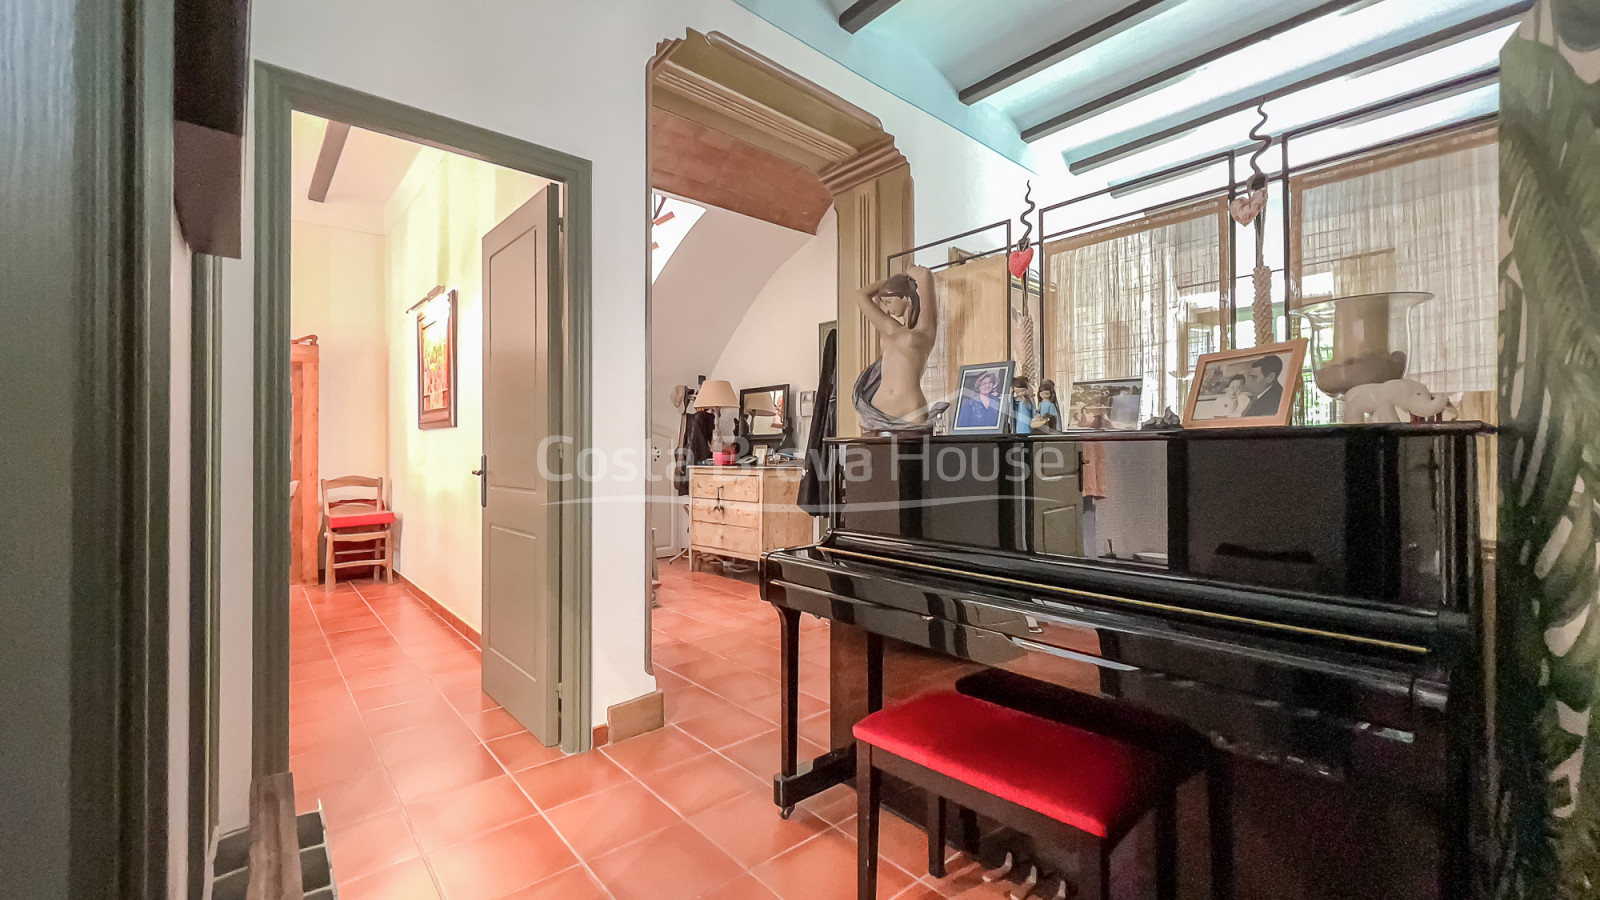 Charming manor house for sale in Palafrugell, Costa Brava